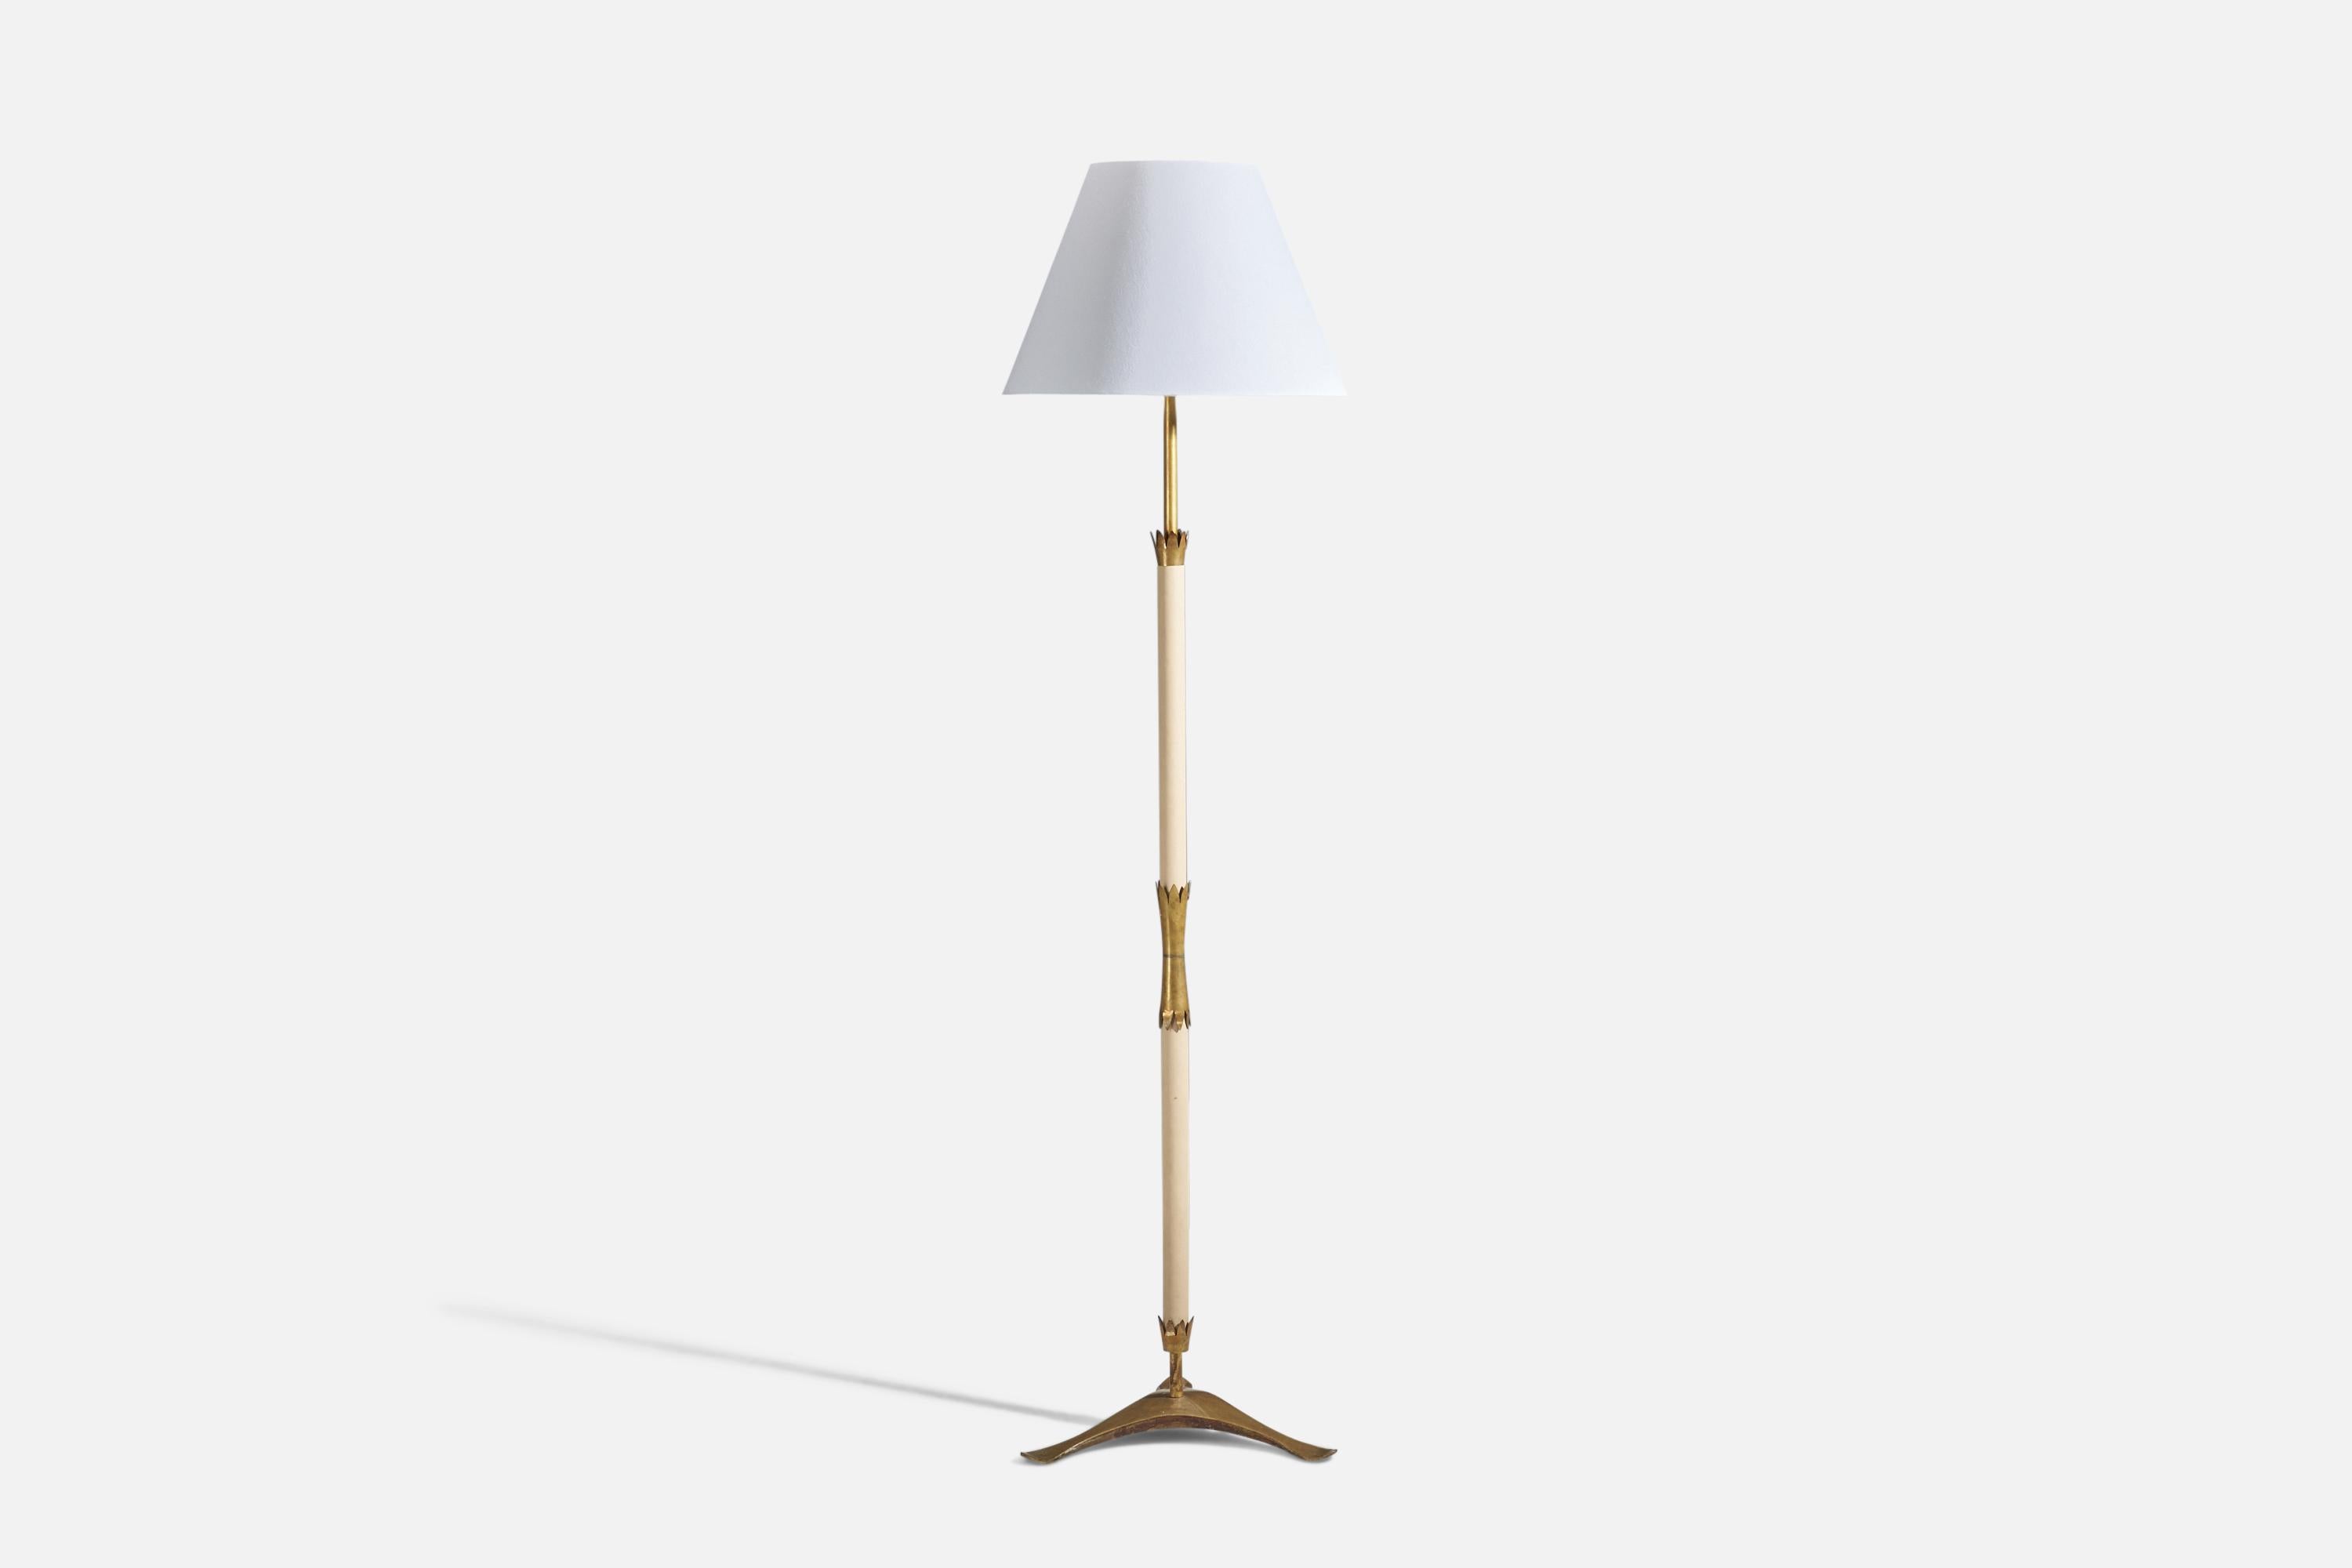 A brass, leatherette, marble and fabric floor lamp designed by Angelo Lelii and produced by Arredoluce, Italy, c. 1955. 

Sold with Lampshade. Dimensions stated are of Floor Lamp with Lampshade. 

Sockets take standard E-26 medium base bulbs.

There